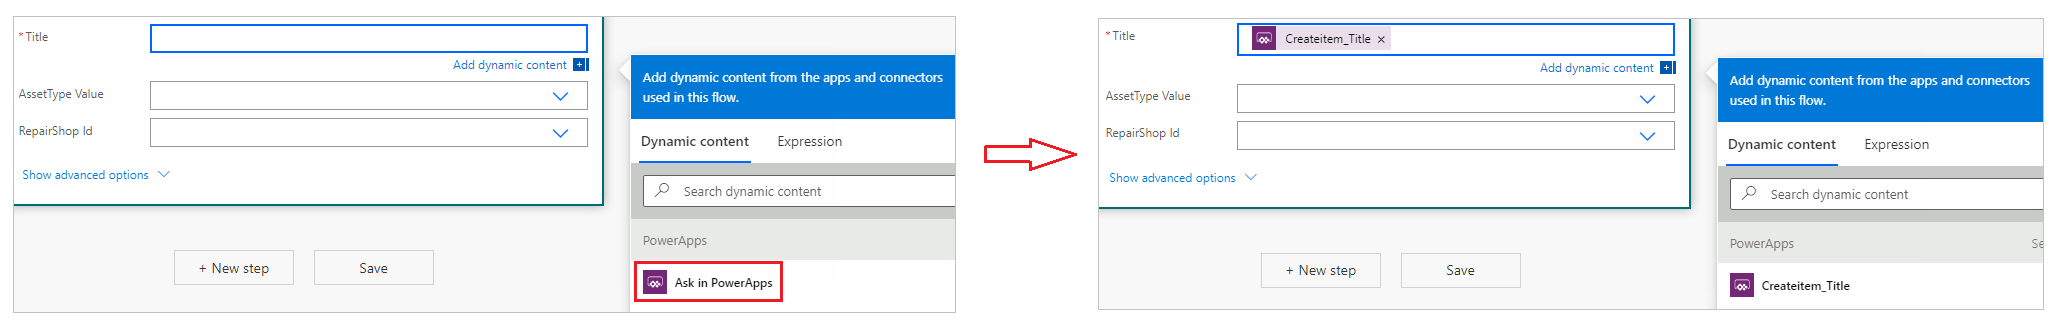 Ask in Power Apps - create title.